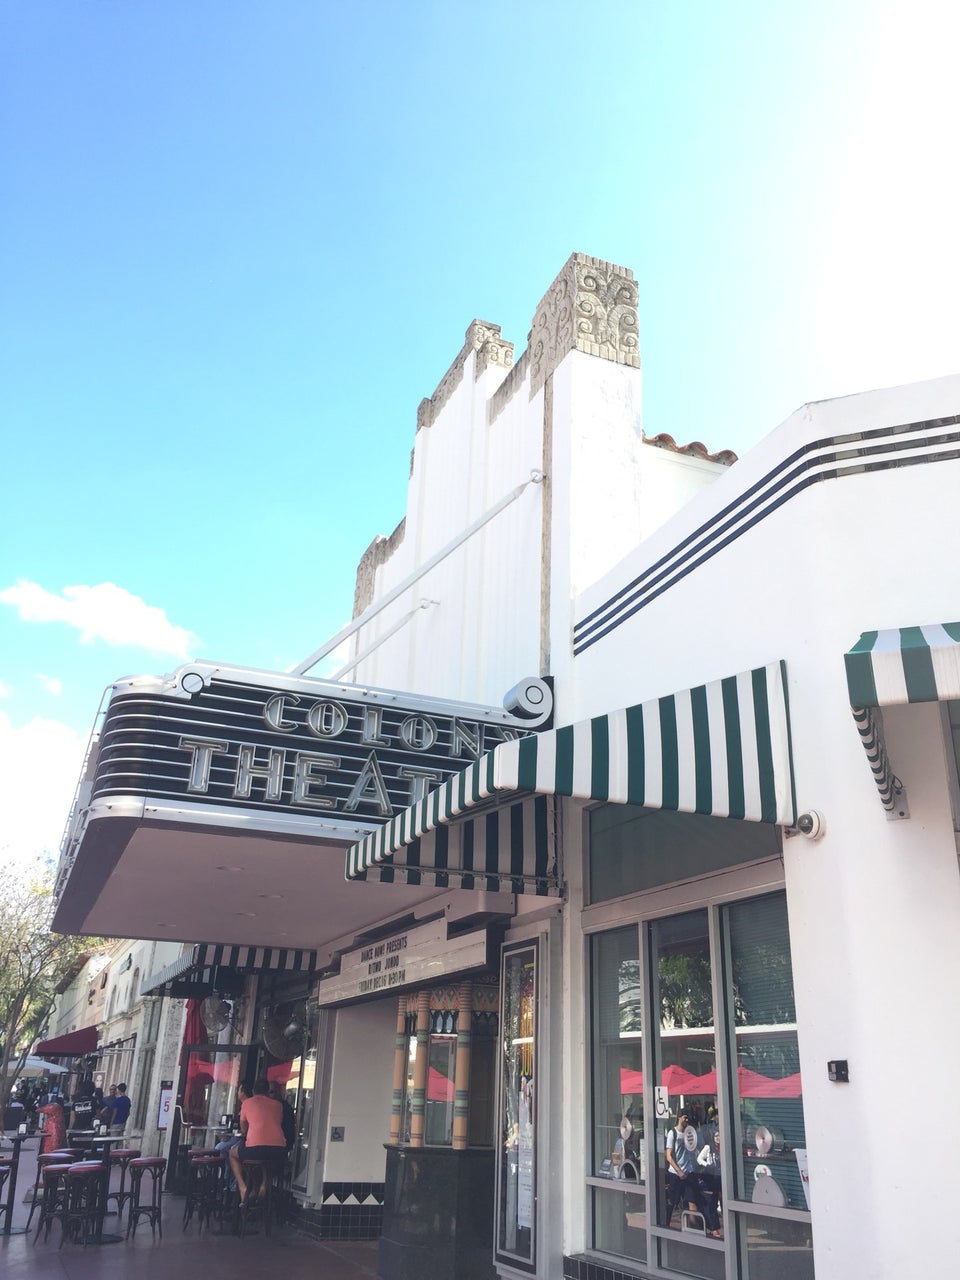 Photo of Colony Theater